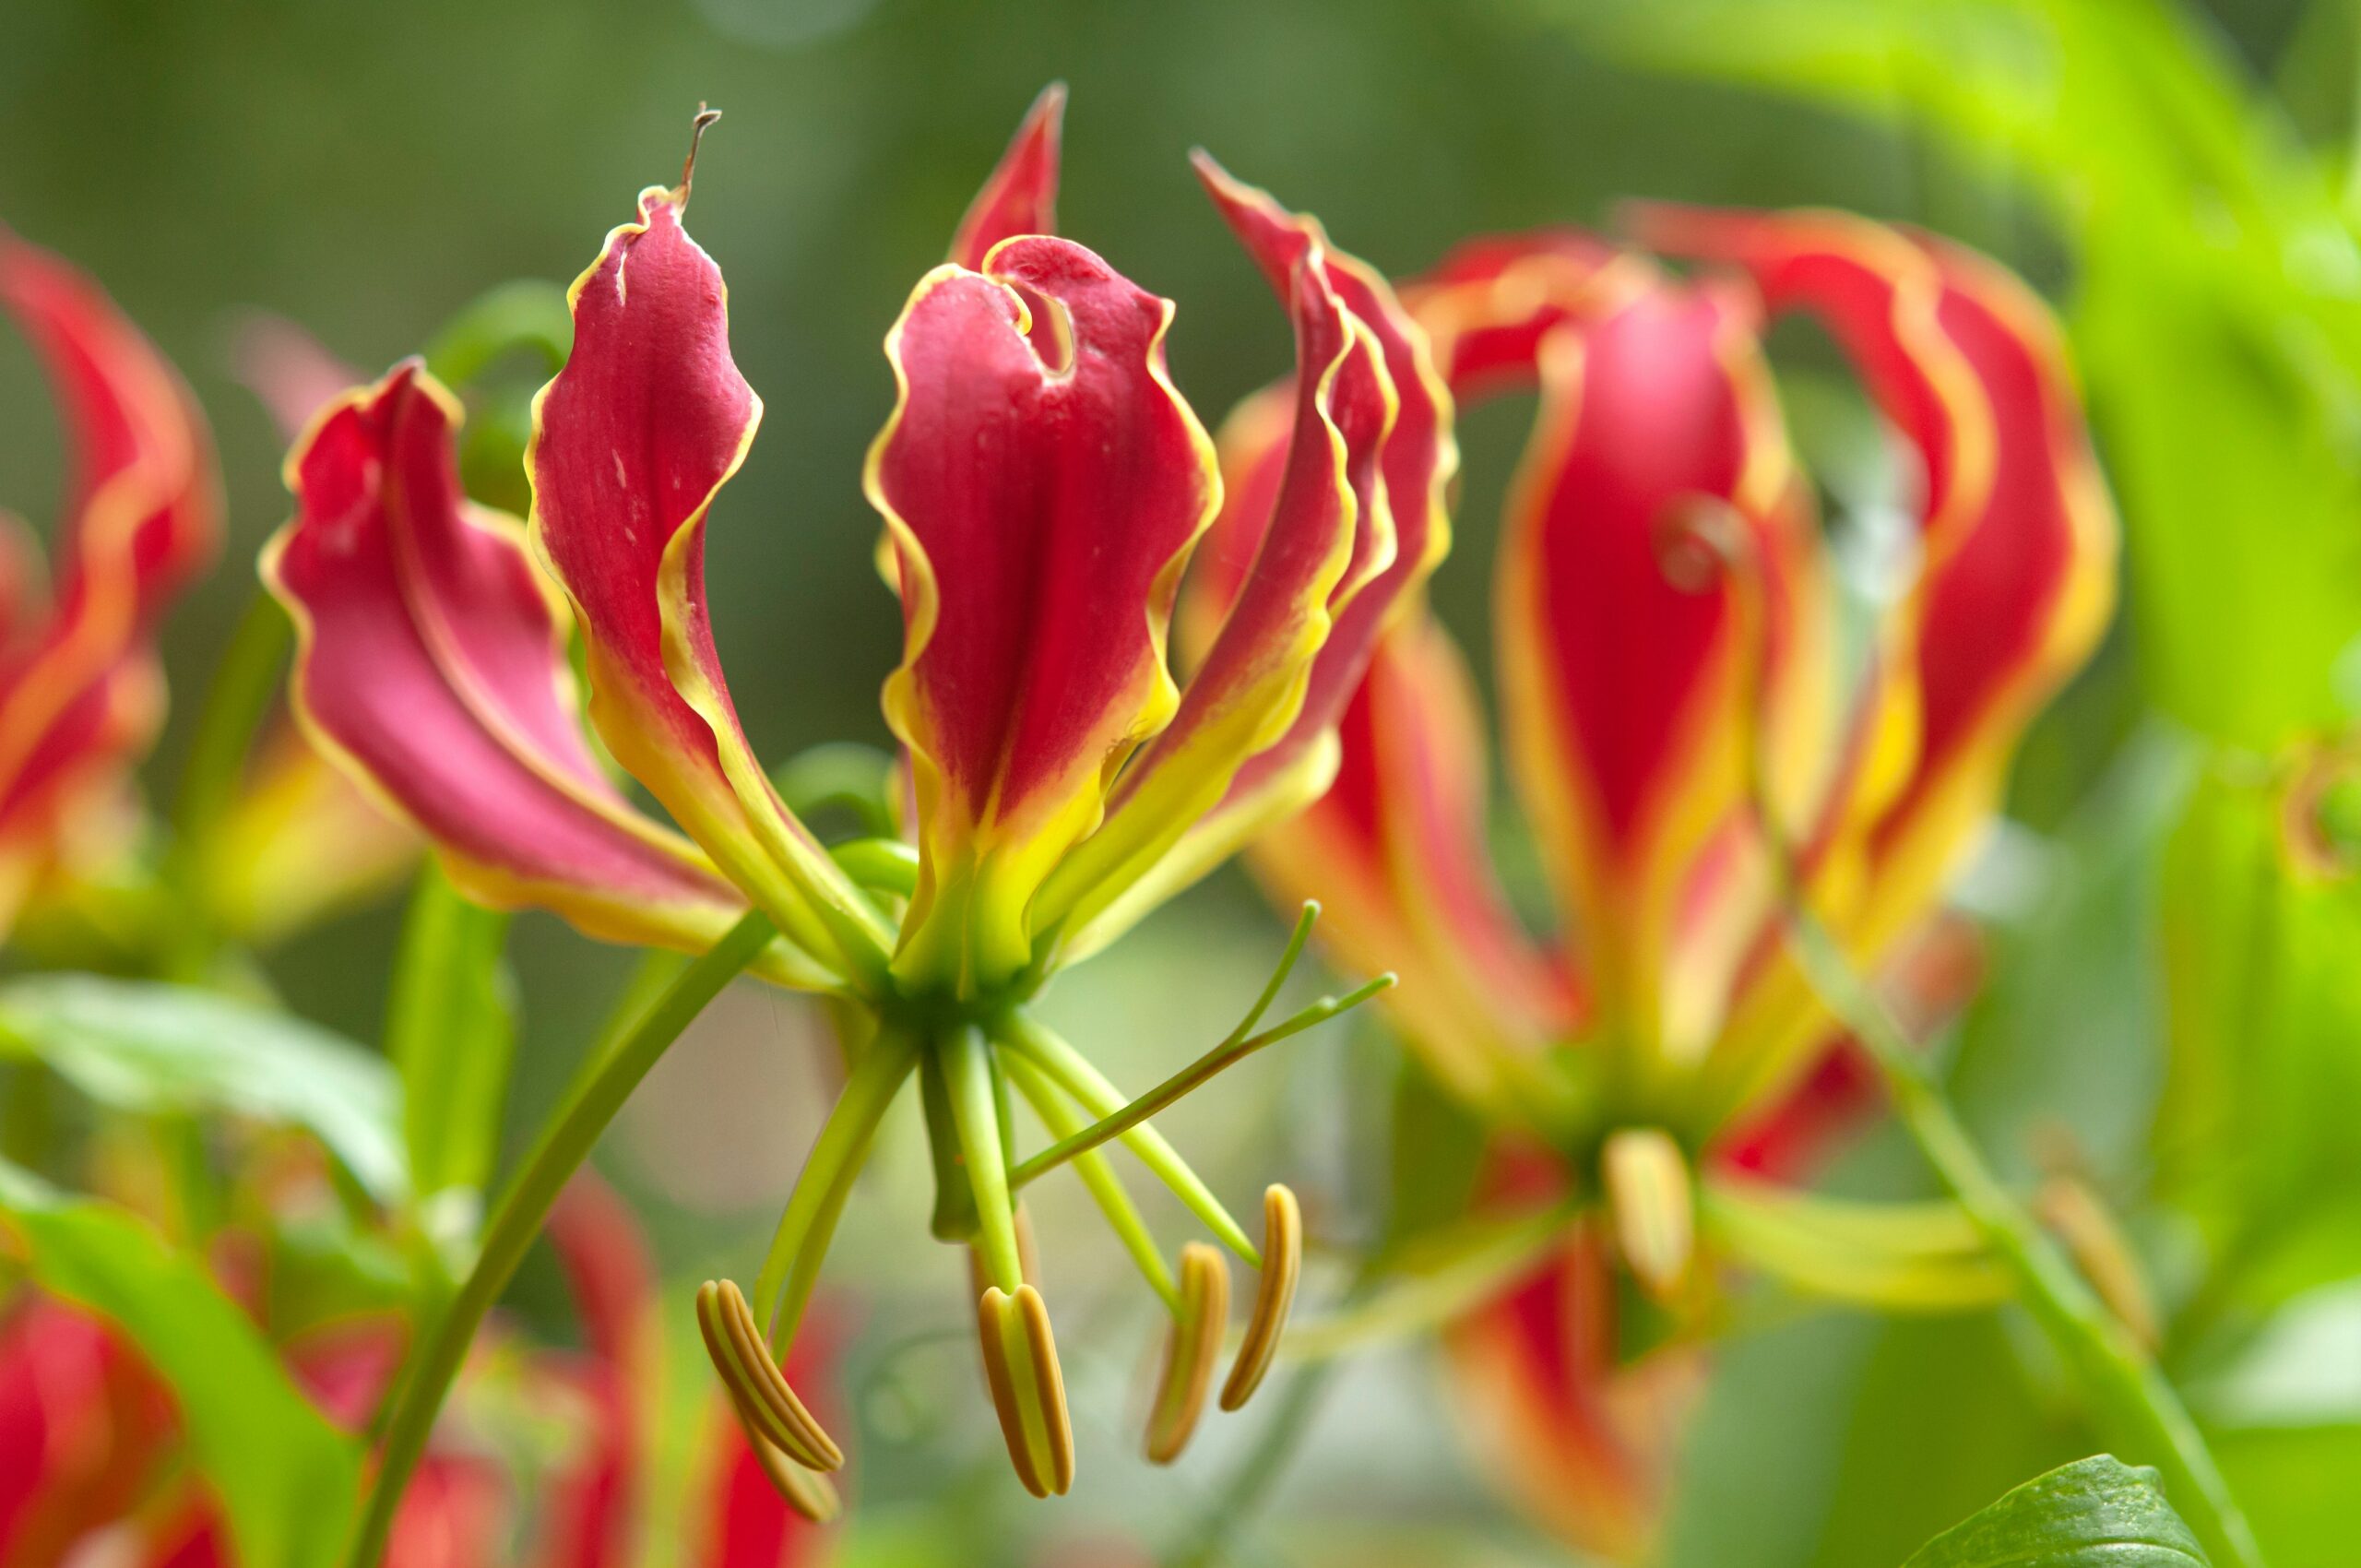 National Flower of Zimbabwe -Flame lily